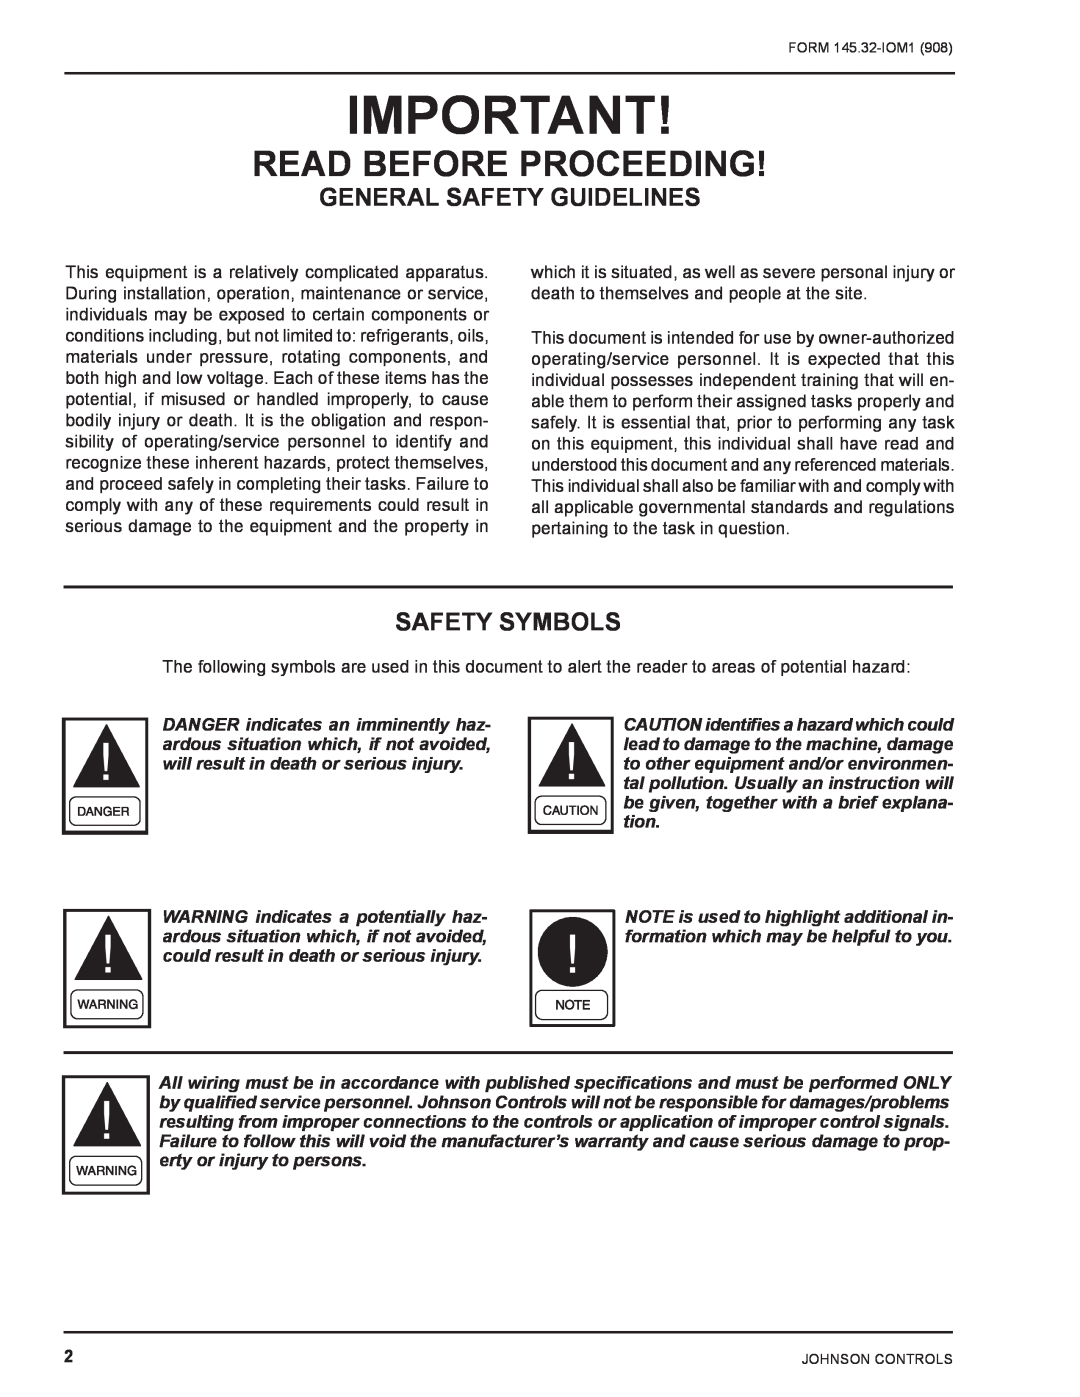 Energy Tech Laboratories DSH installation instructions General Safety Guidelines, safety symbols, Read Before Proceeding 